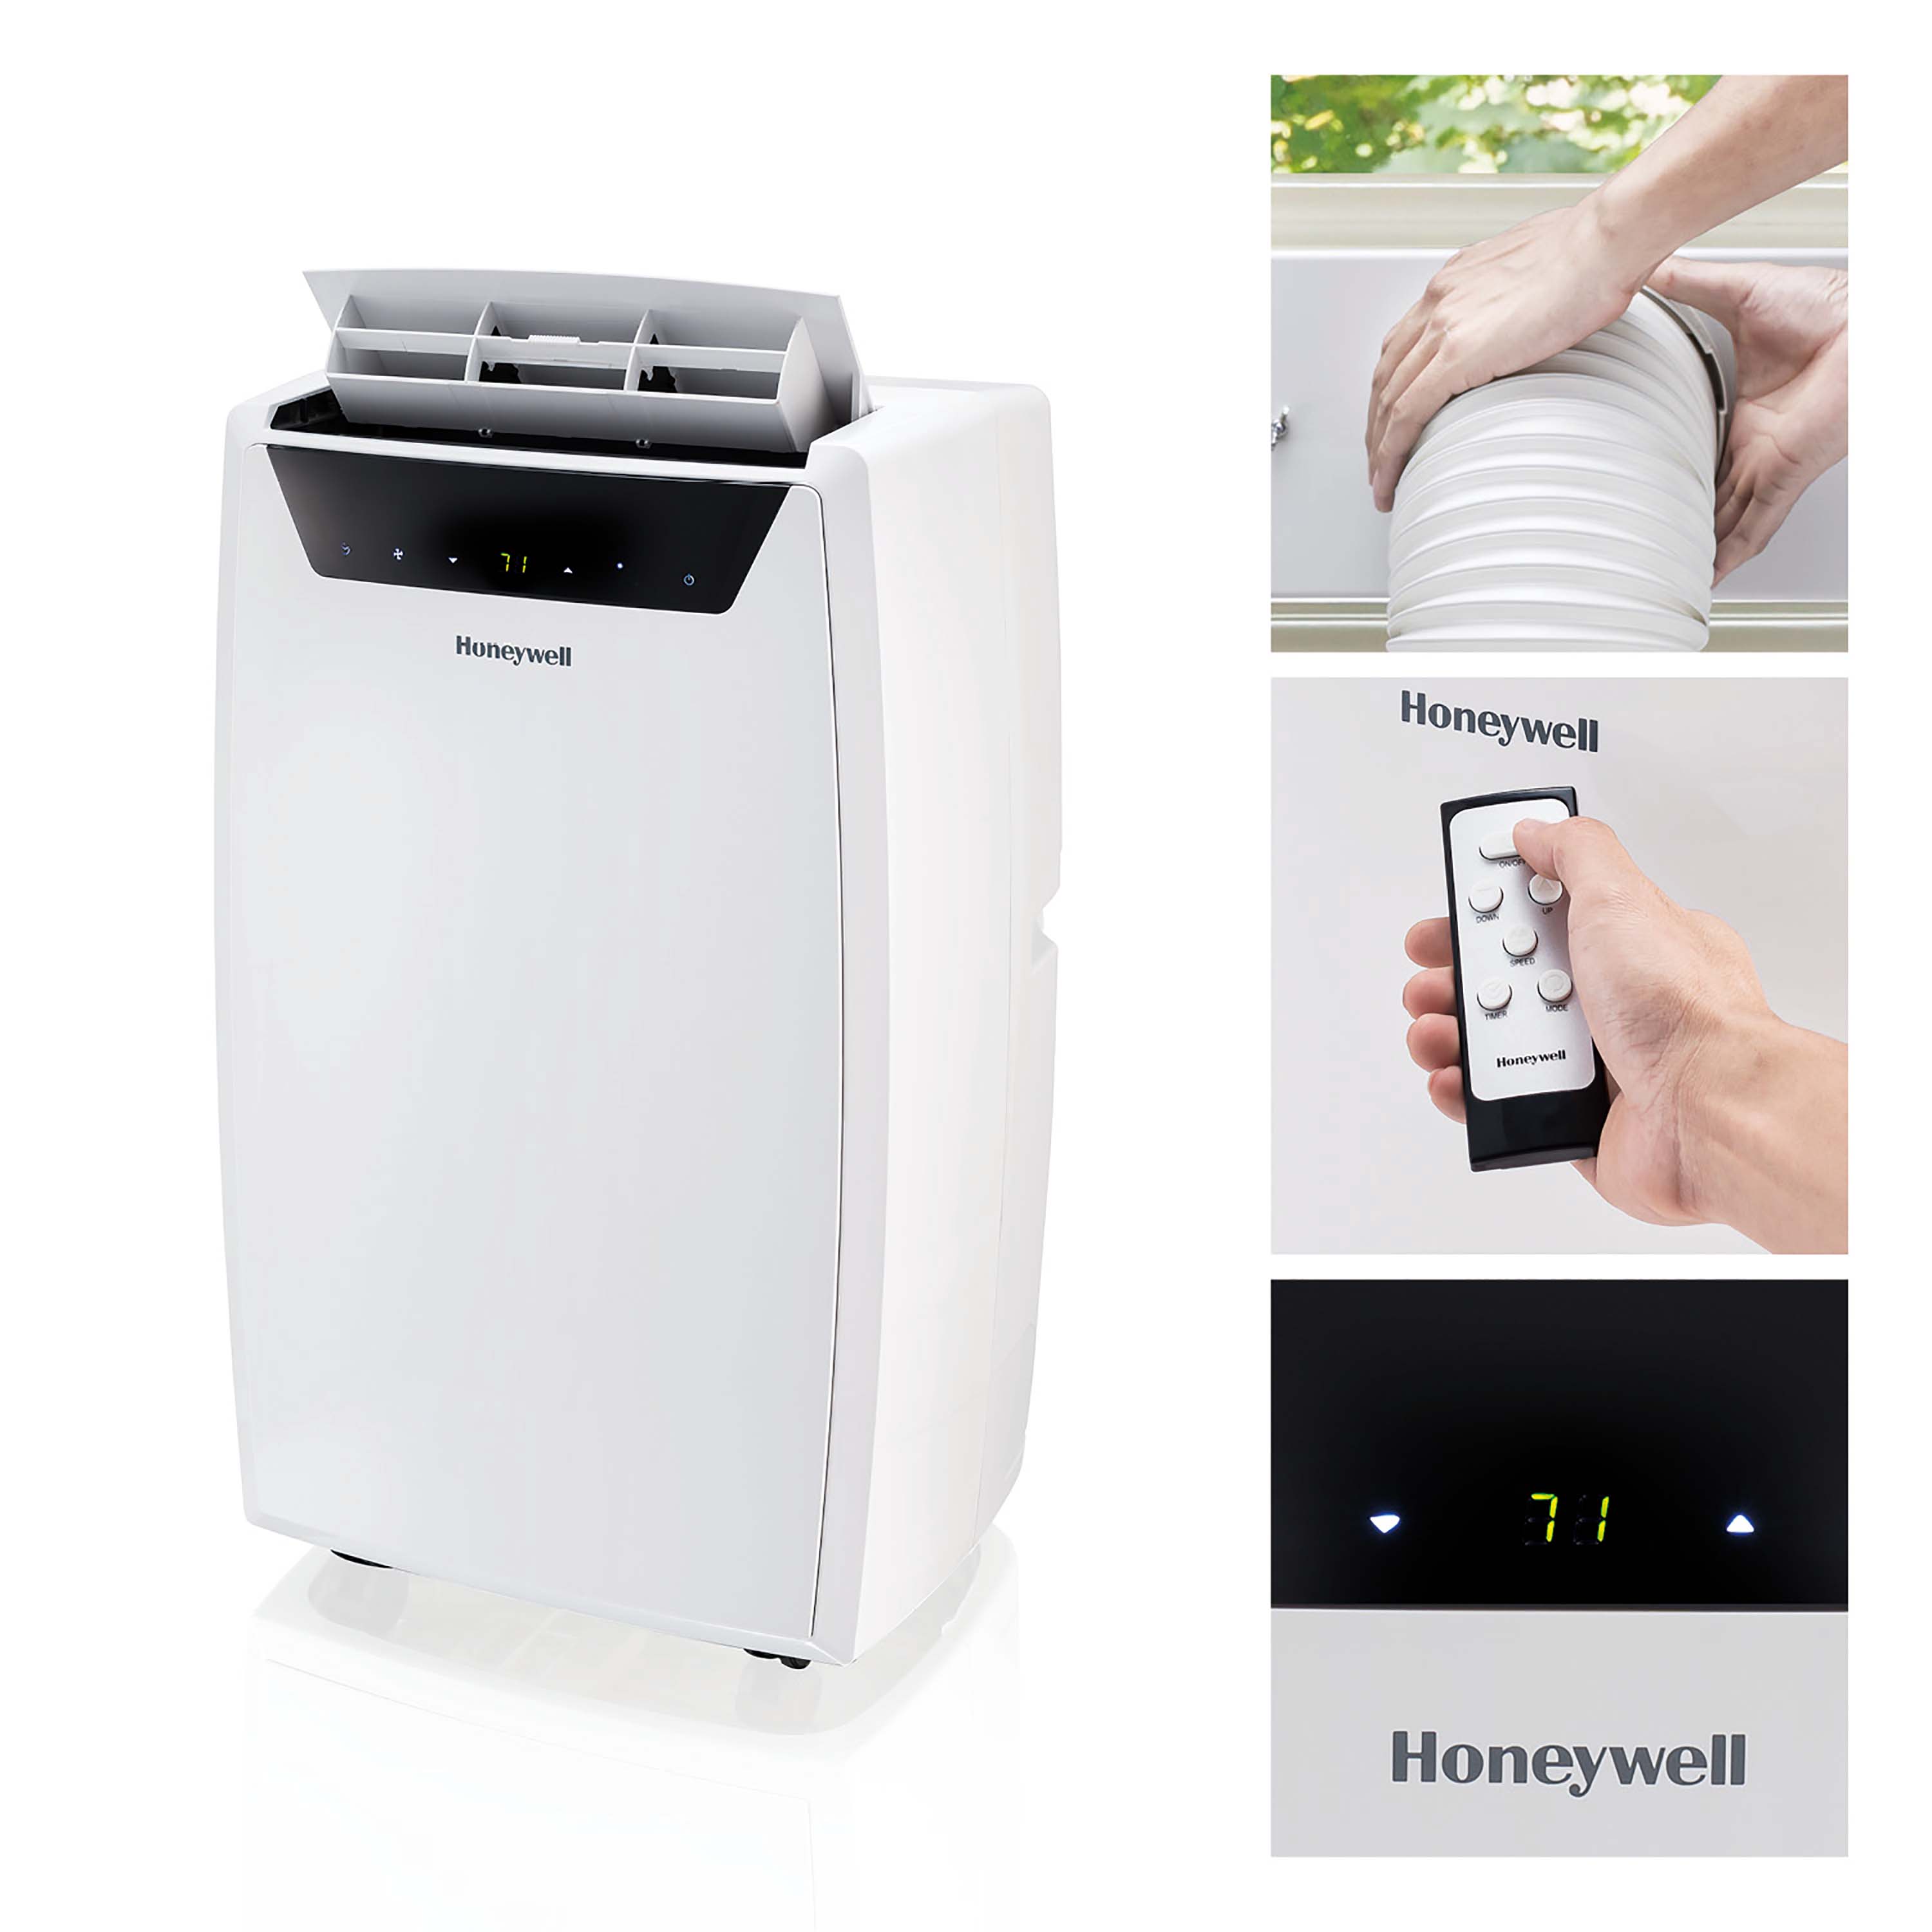 Honeywell Classic Portable Air Conditioner with Dehumidifier & Fan, Cools Rooms Up to 700 Sq. Ft. with Drain Pan & Insulation Tape, MN4CFSWW0 (White) - image 1 of 10